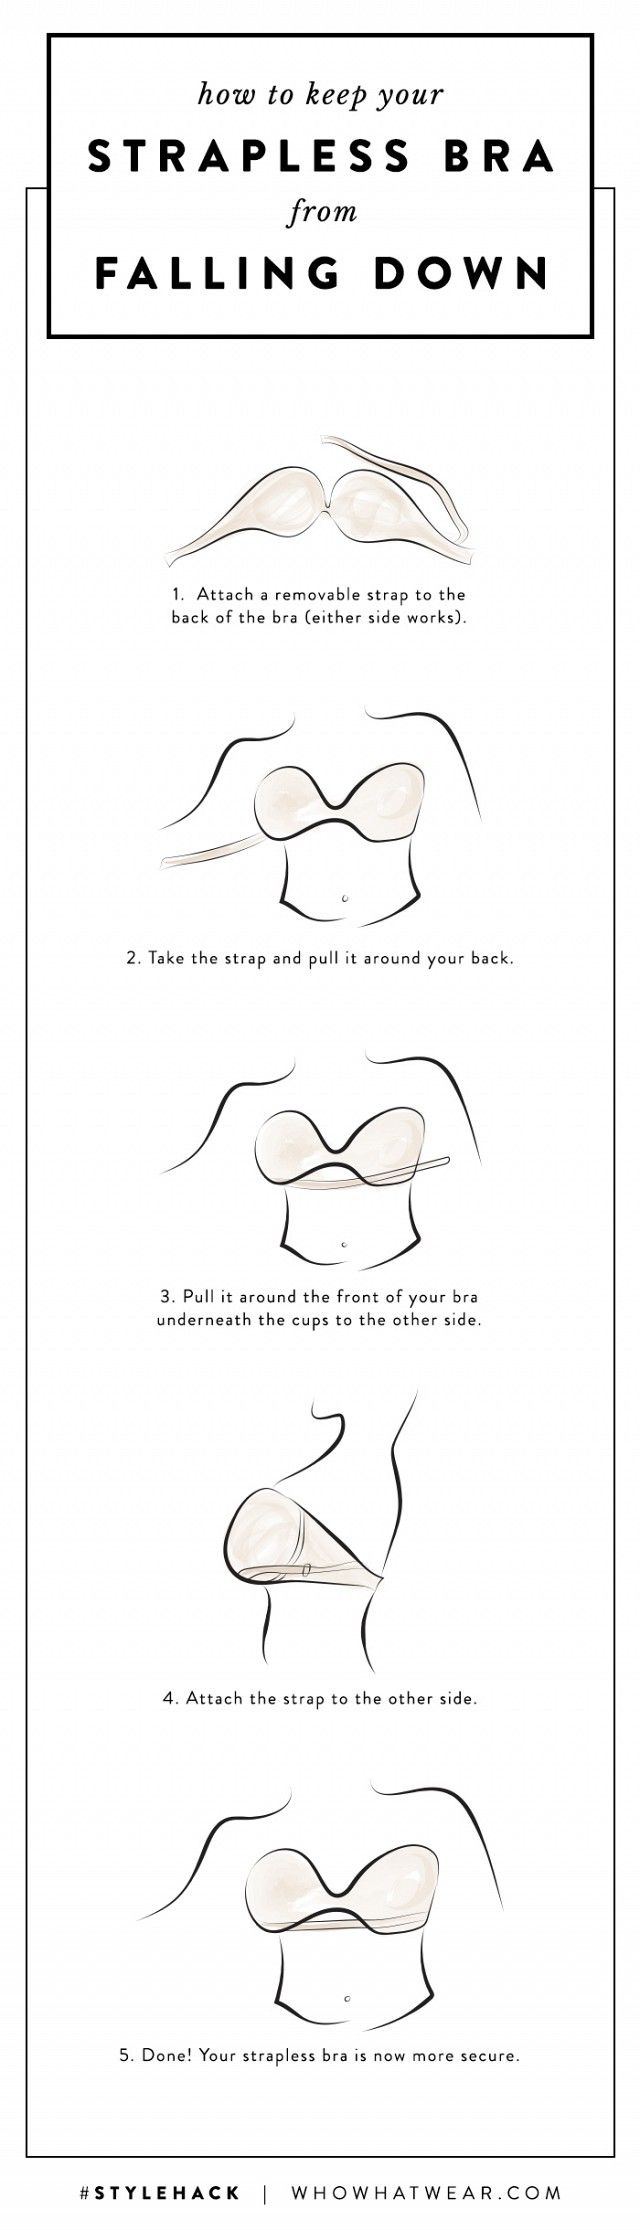 Bra Hack #1 Sweat Stains, The ultimate bra hack to solve your bust sweat  woes!